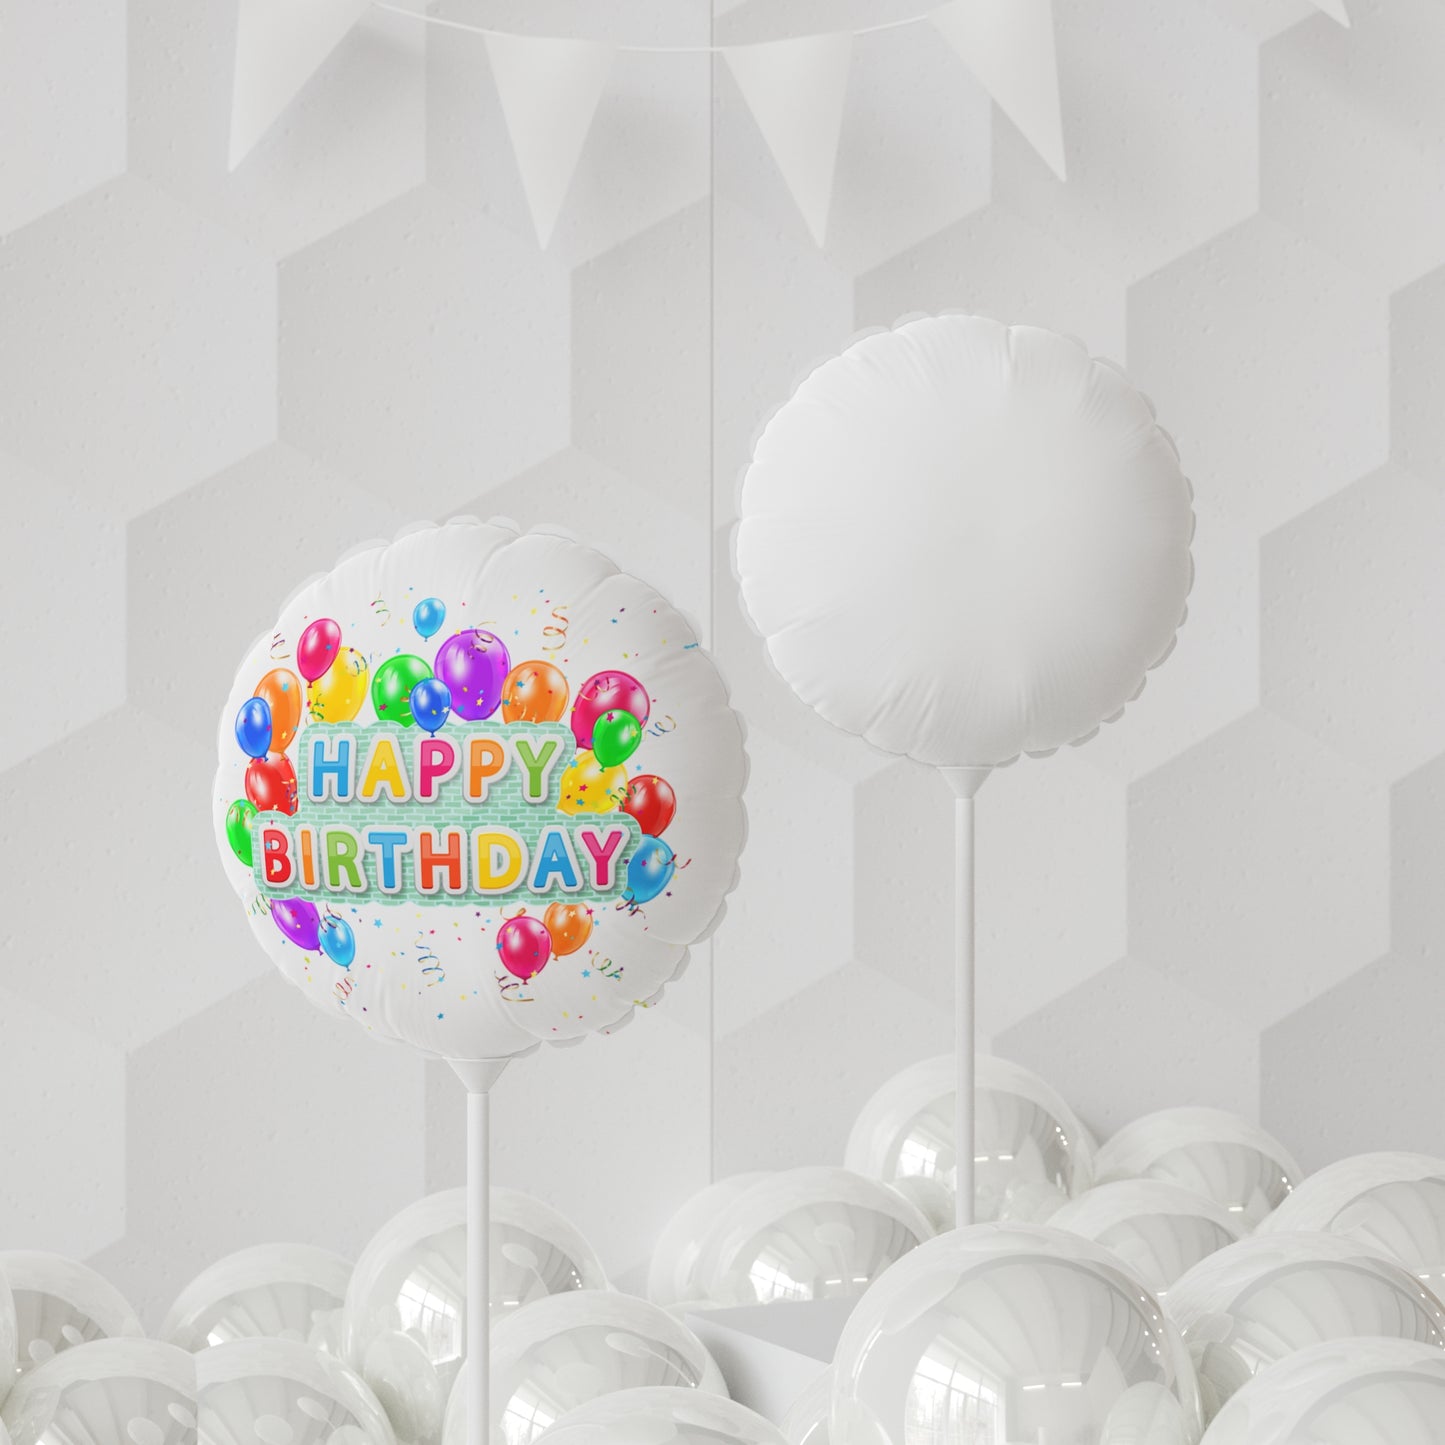 "Happy Birthday" Balloon (Round), 11", Inflate With Air Only, Indoor and Outdoor Decoration